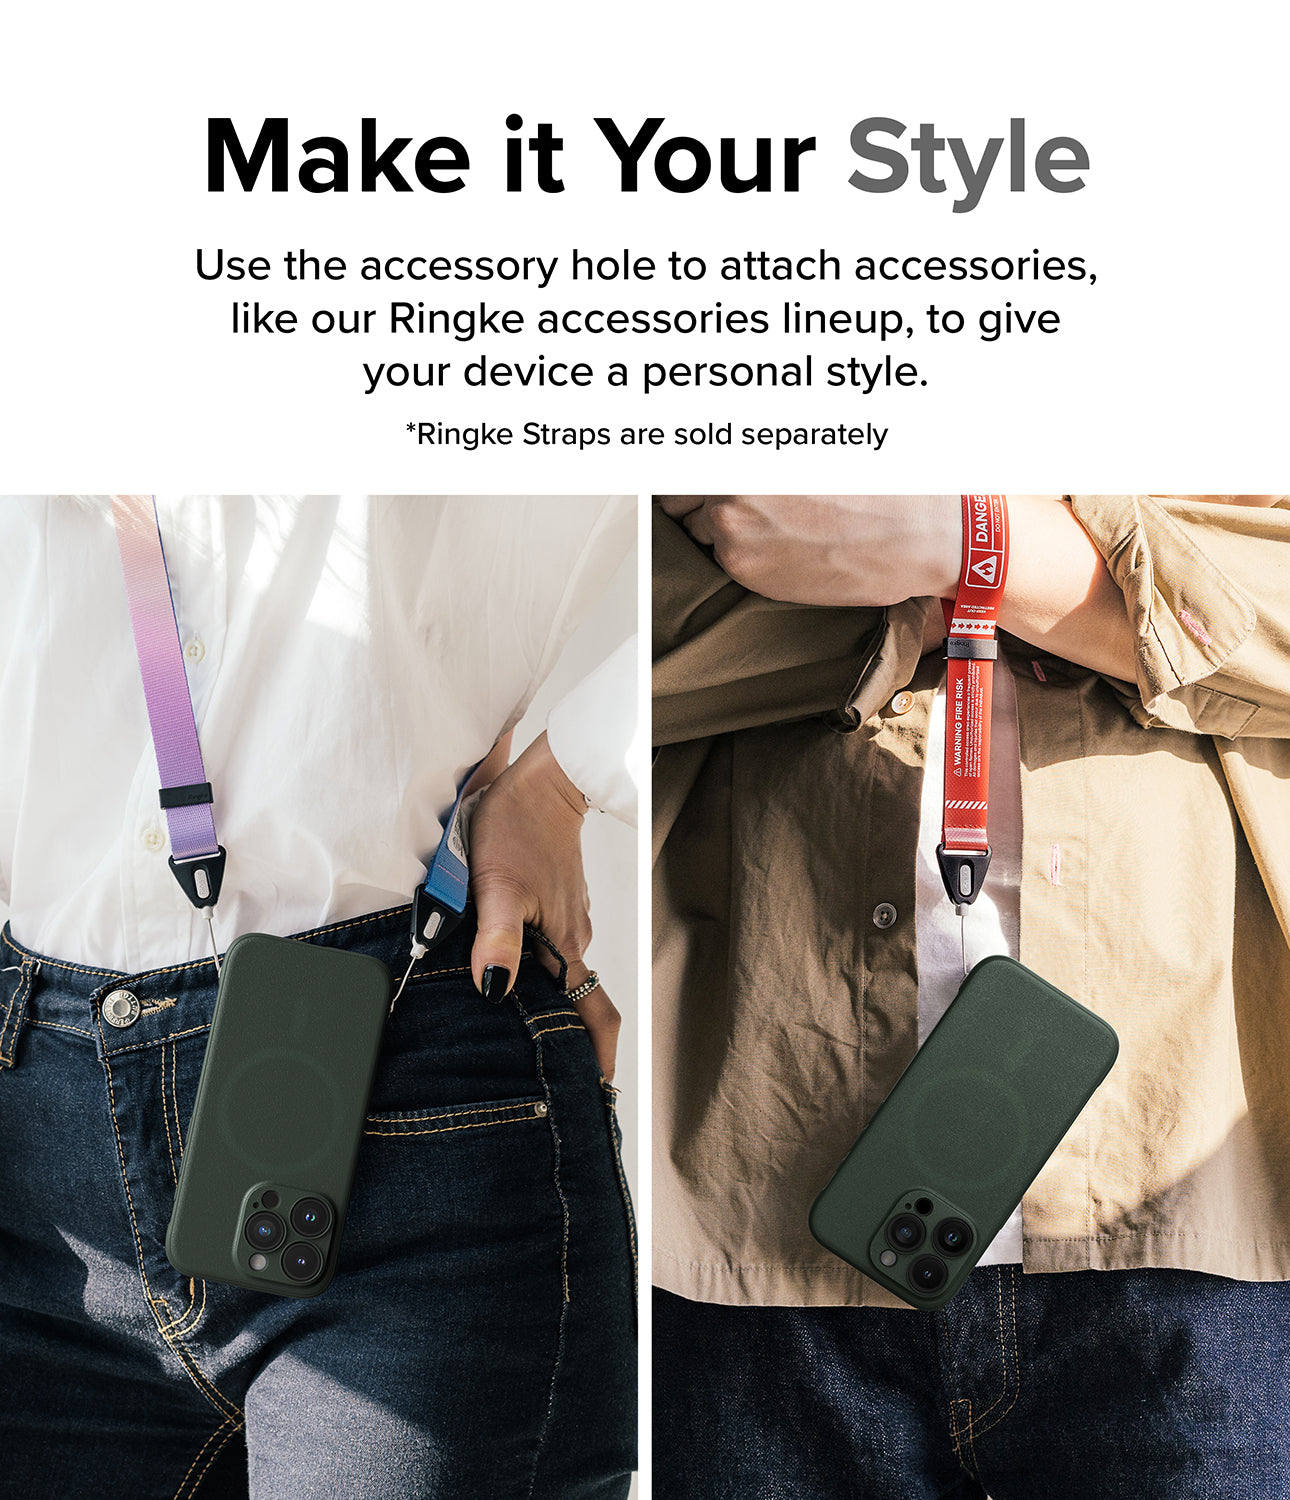 iPhone 15 Pro Case | Onyx Magnetic - Dark Green - Make it Your Style. Use the accessory hole to attach accessories like our Ringke accessories lineup, to give your device a personal style.